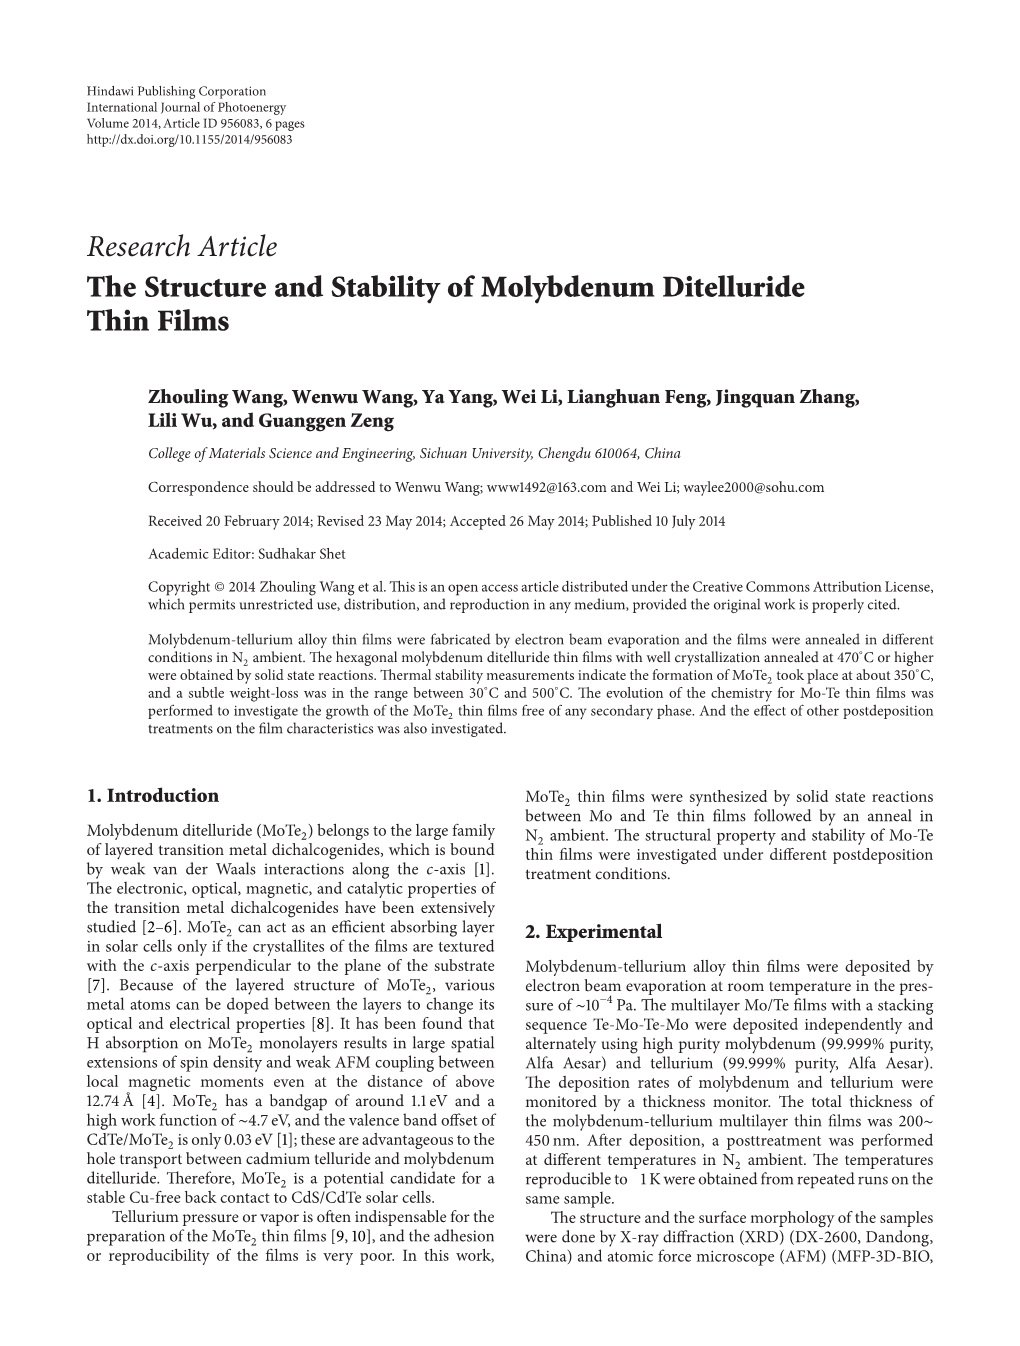 The Structure and Stability of Molybdenum Ditelluride Thin Films